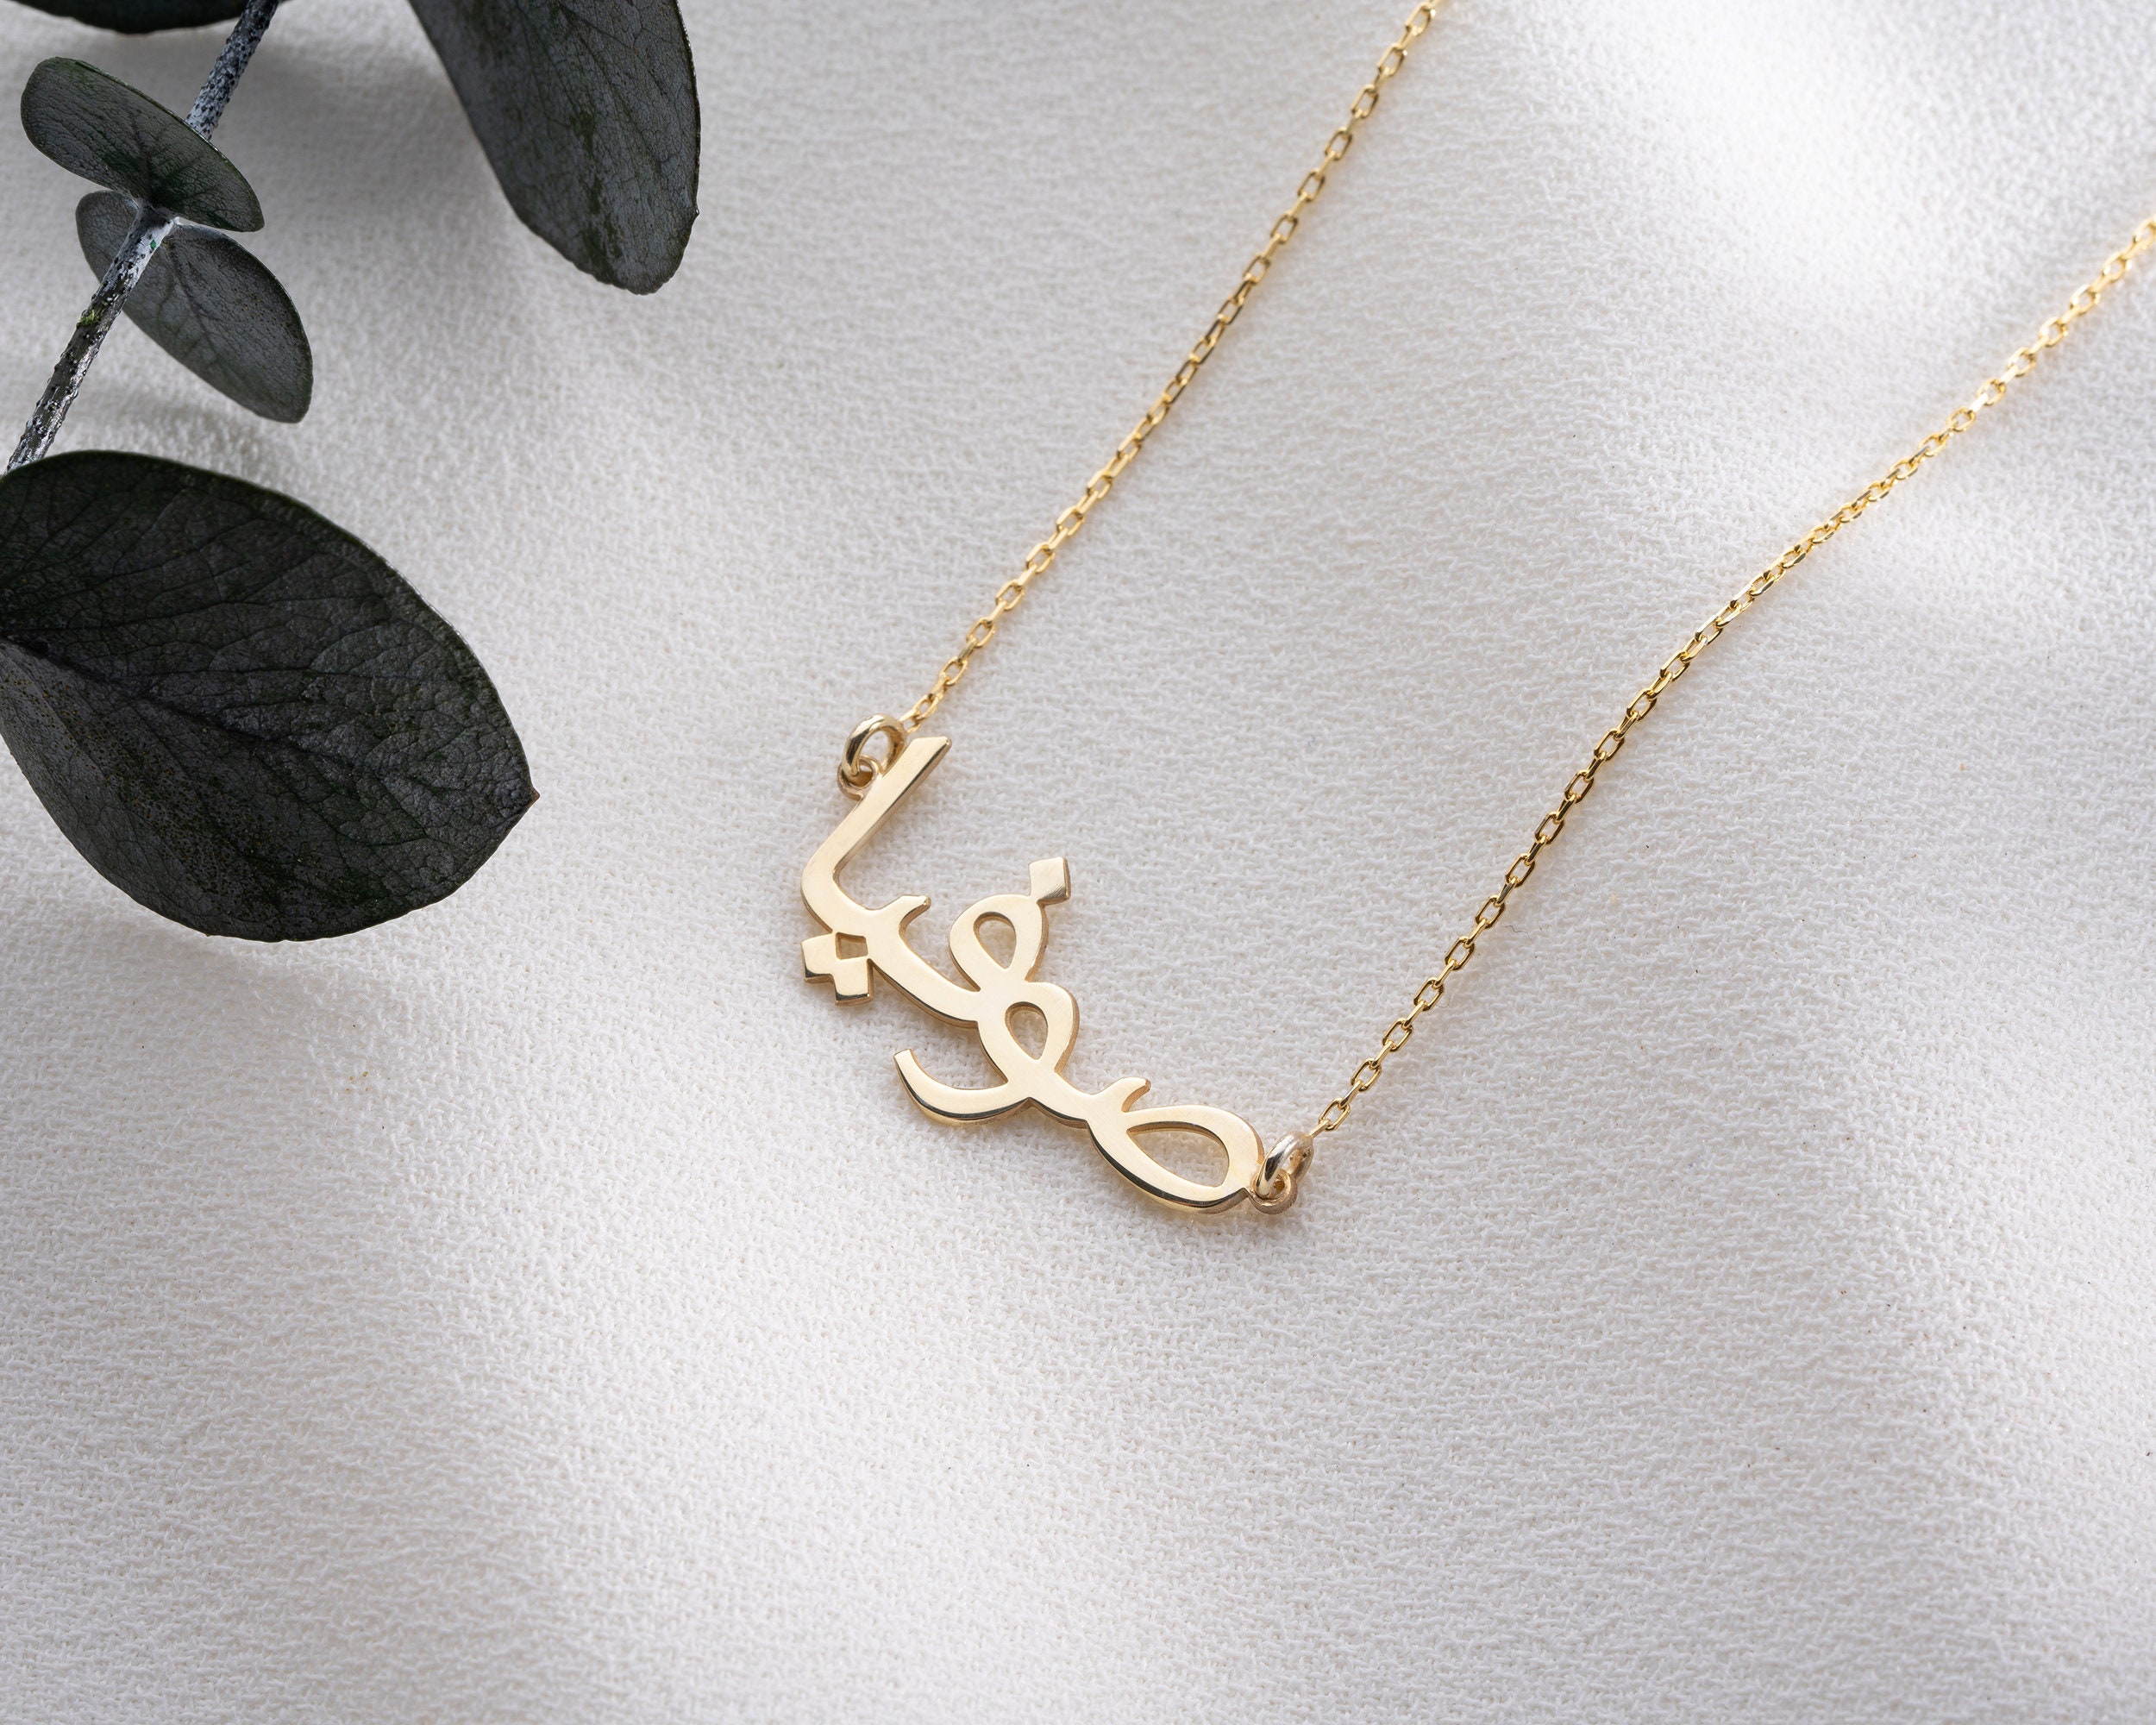 Buy 18k Gold-Plated Sterling Silver Arabic Name Necklace - Custom Made with  Any Name! (22